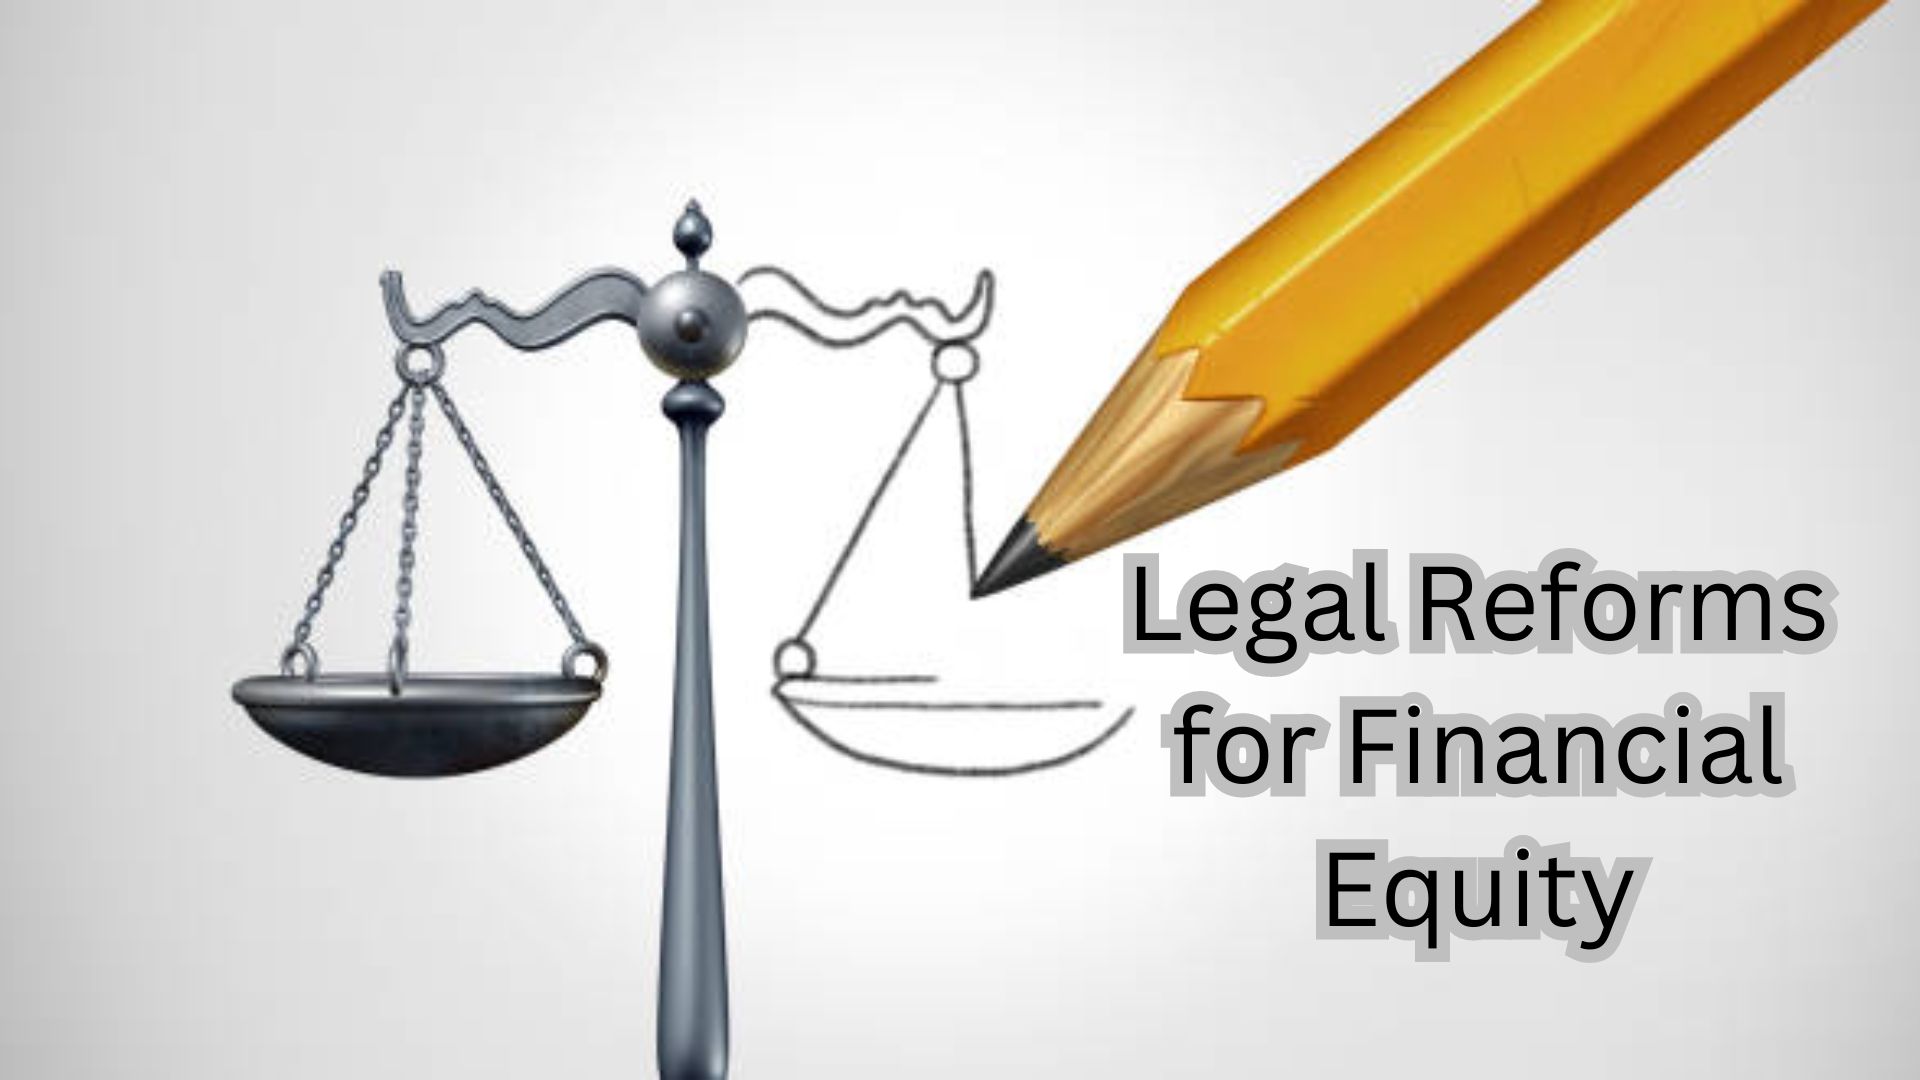 Legal Reforms for Financial Equity.